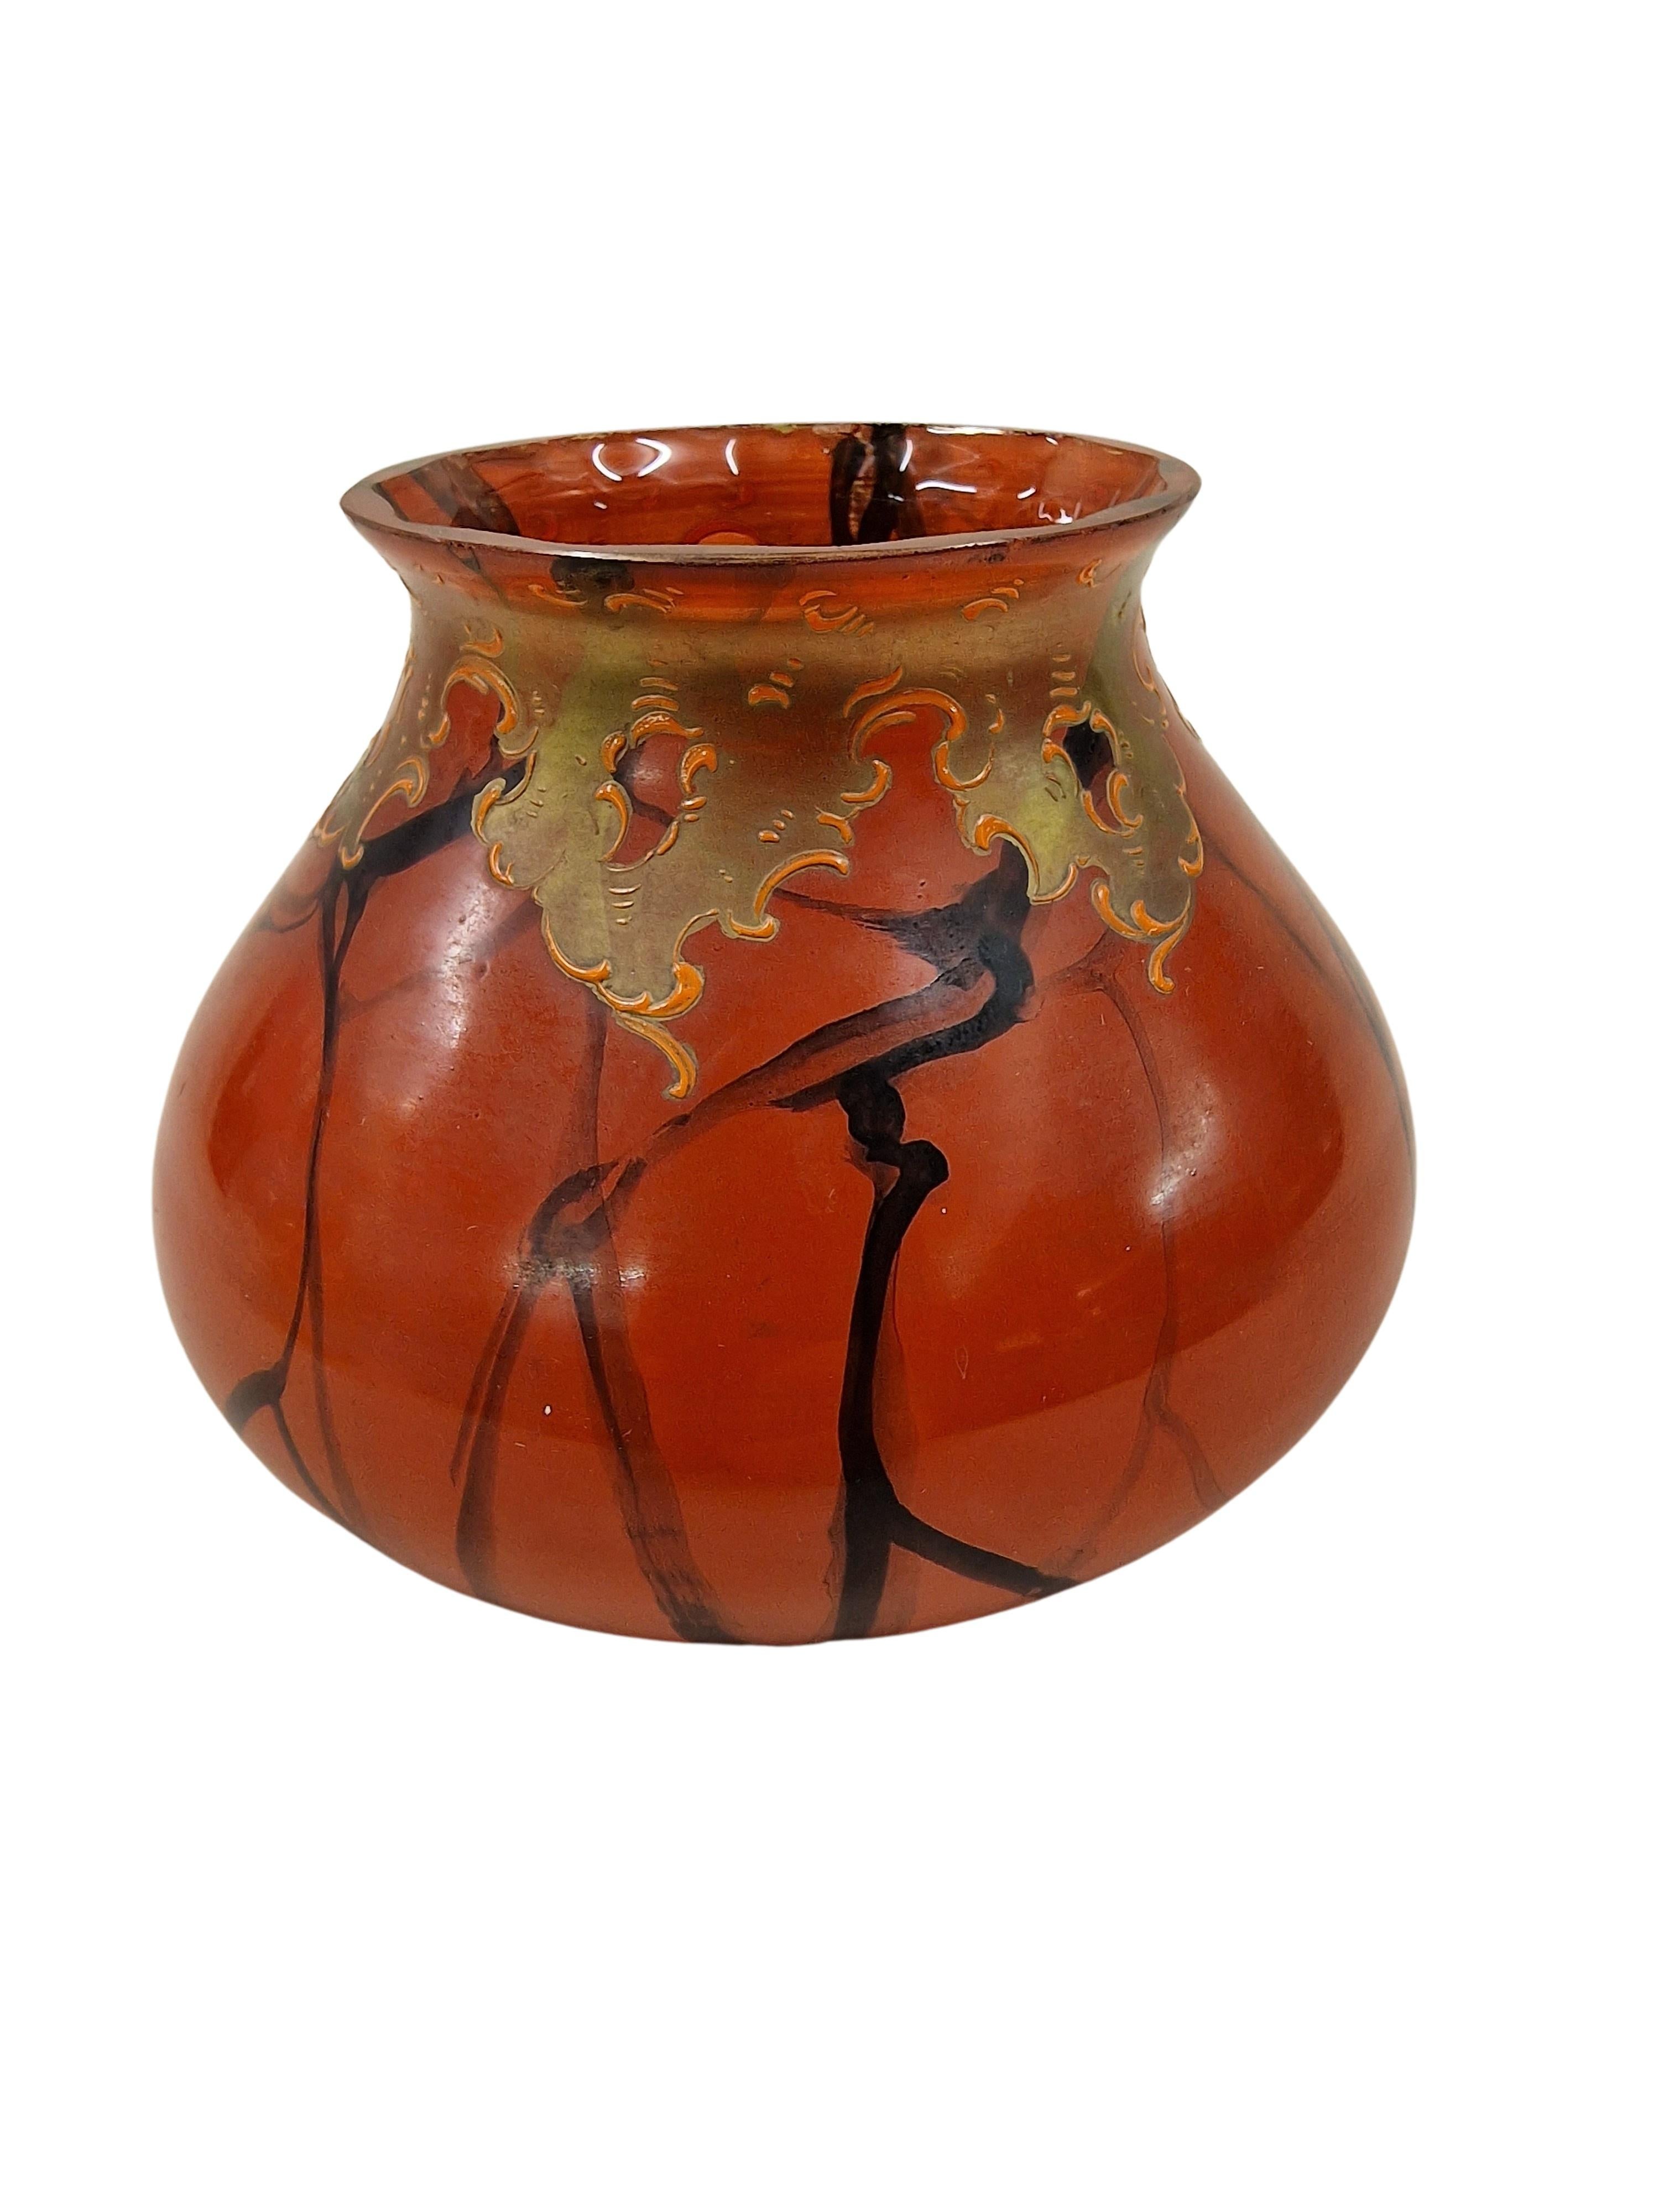 This french Vase is a very nice, early object of the Art Nouveau / Jugendstil era. 
The glass body is made of orange glass with a beautifully cut top. The entire bolbous body is over and over painted with stylized branch decor, this makes it a